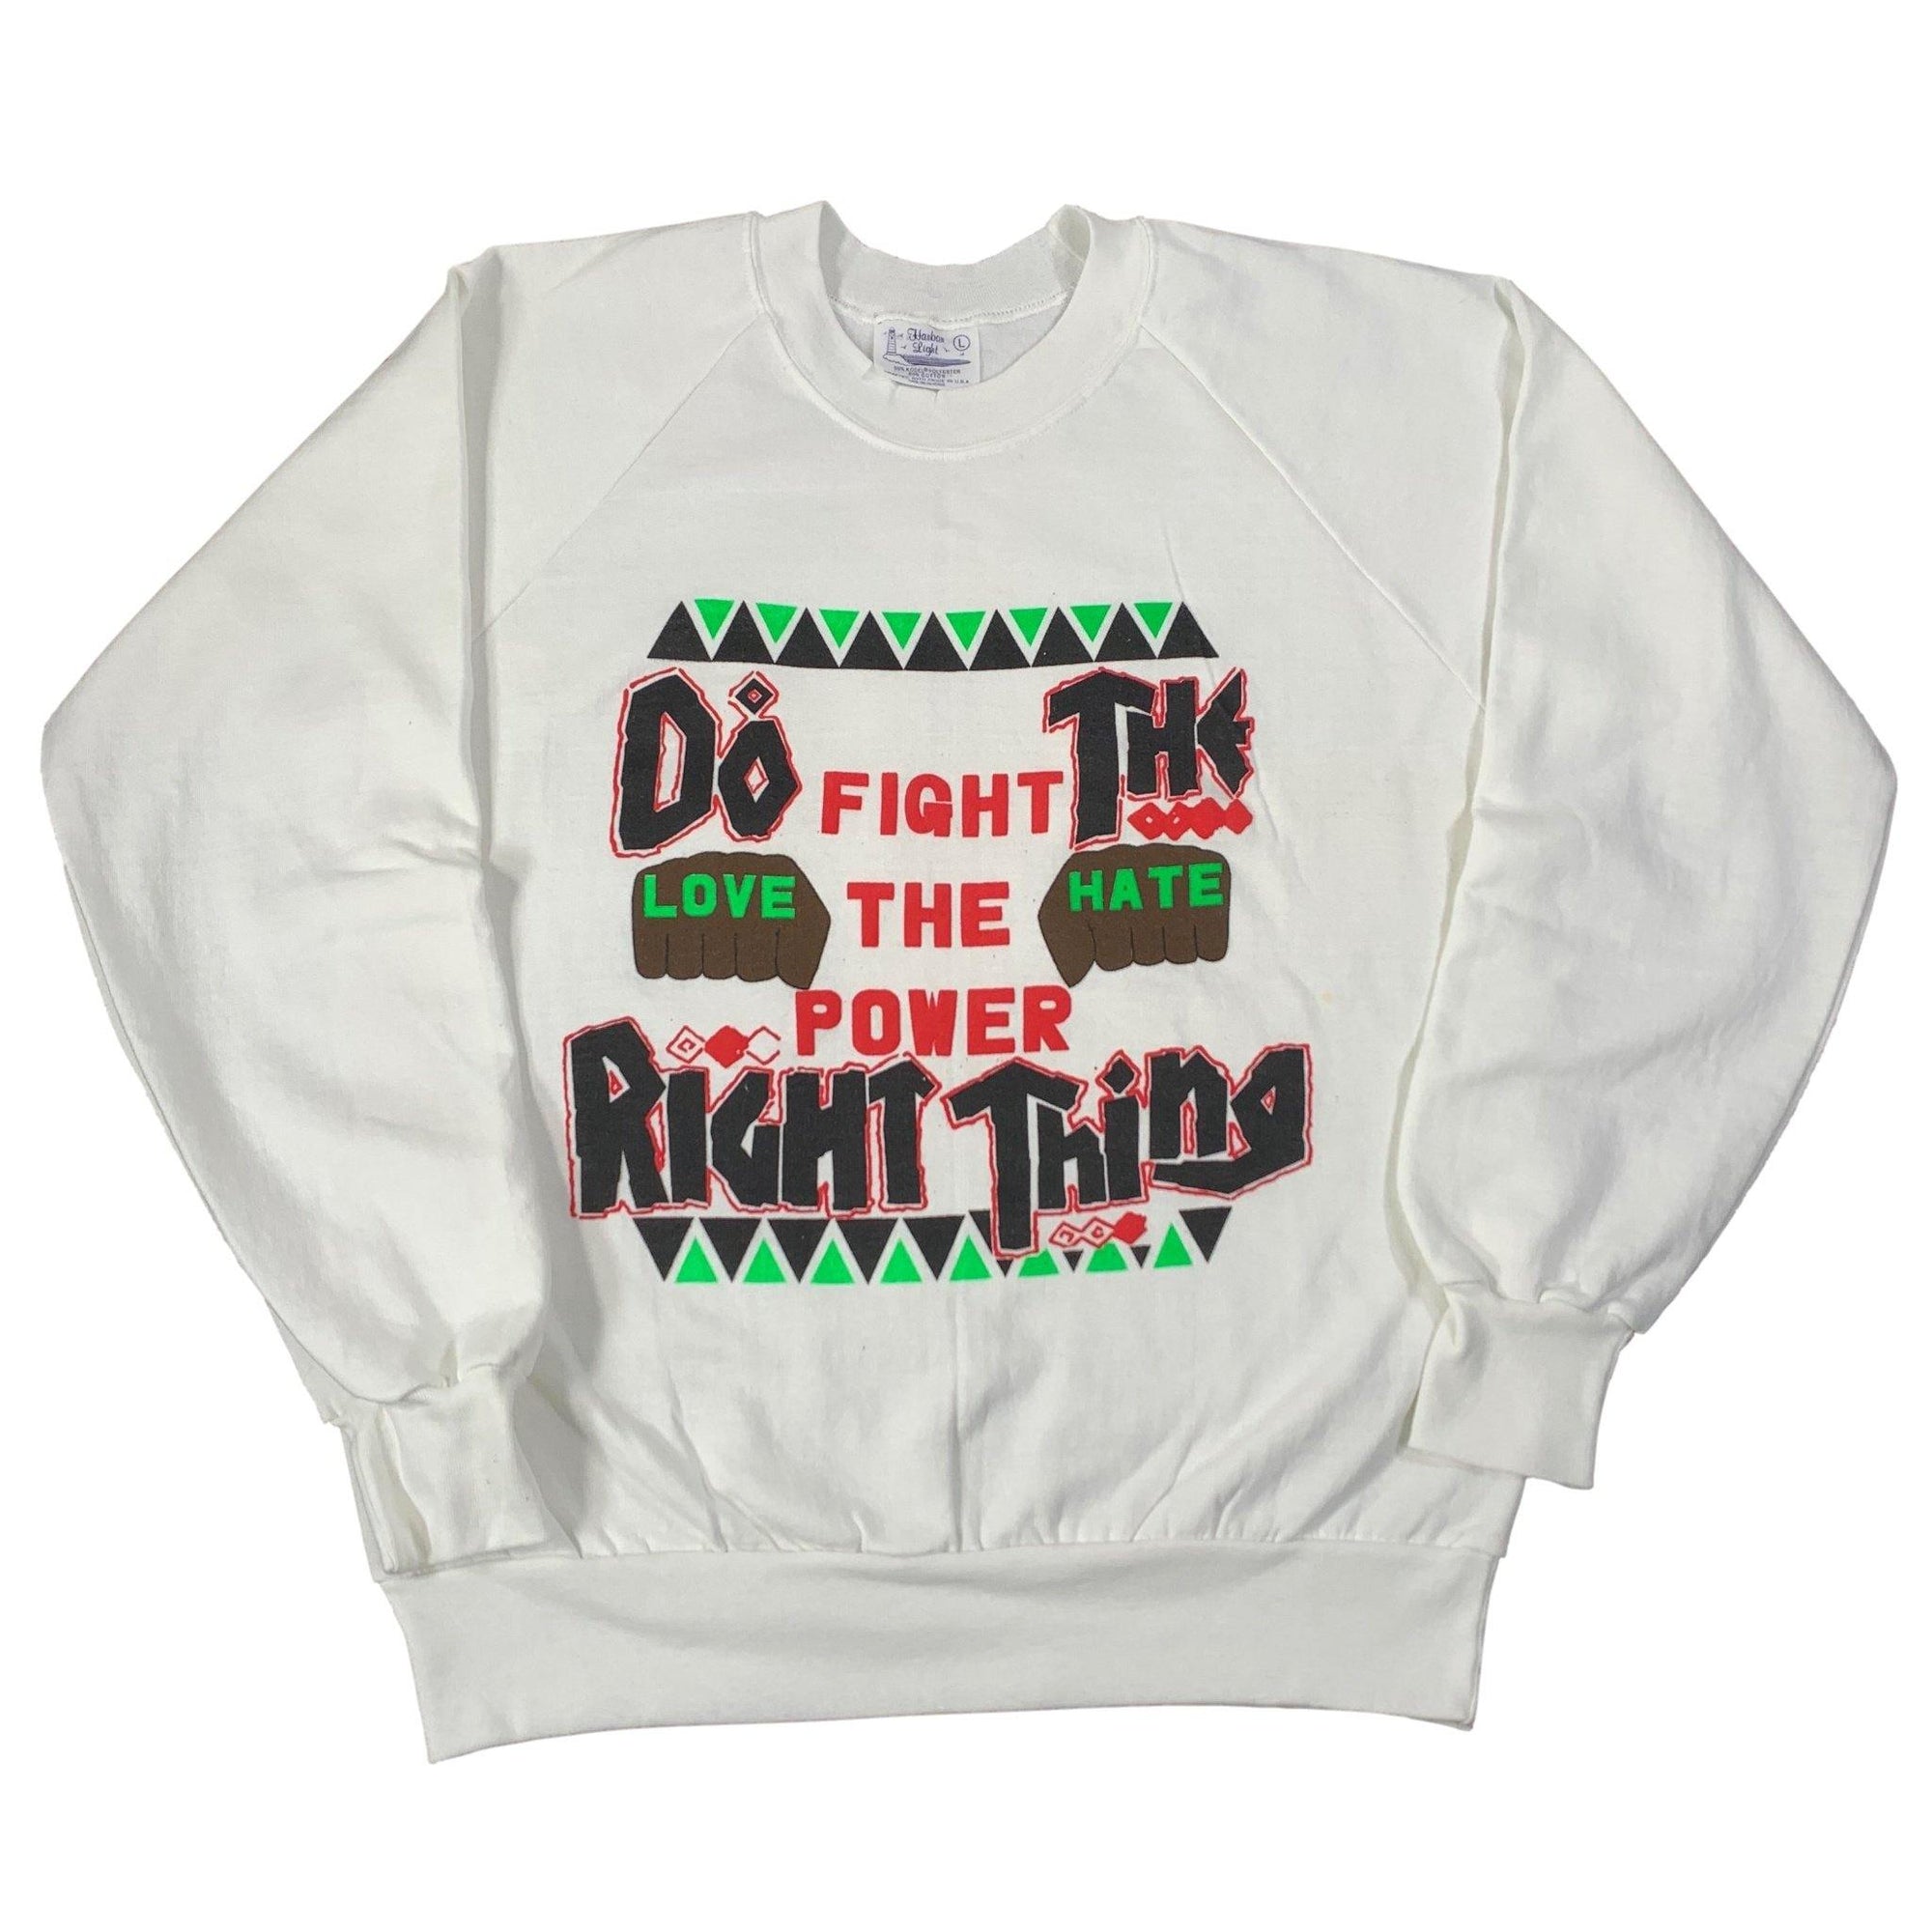 Vintage Do The Right Thing "Fight The Power" Crewneck Sweatshirt - jointcustodydc